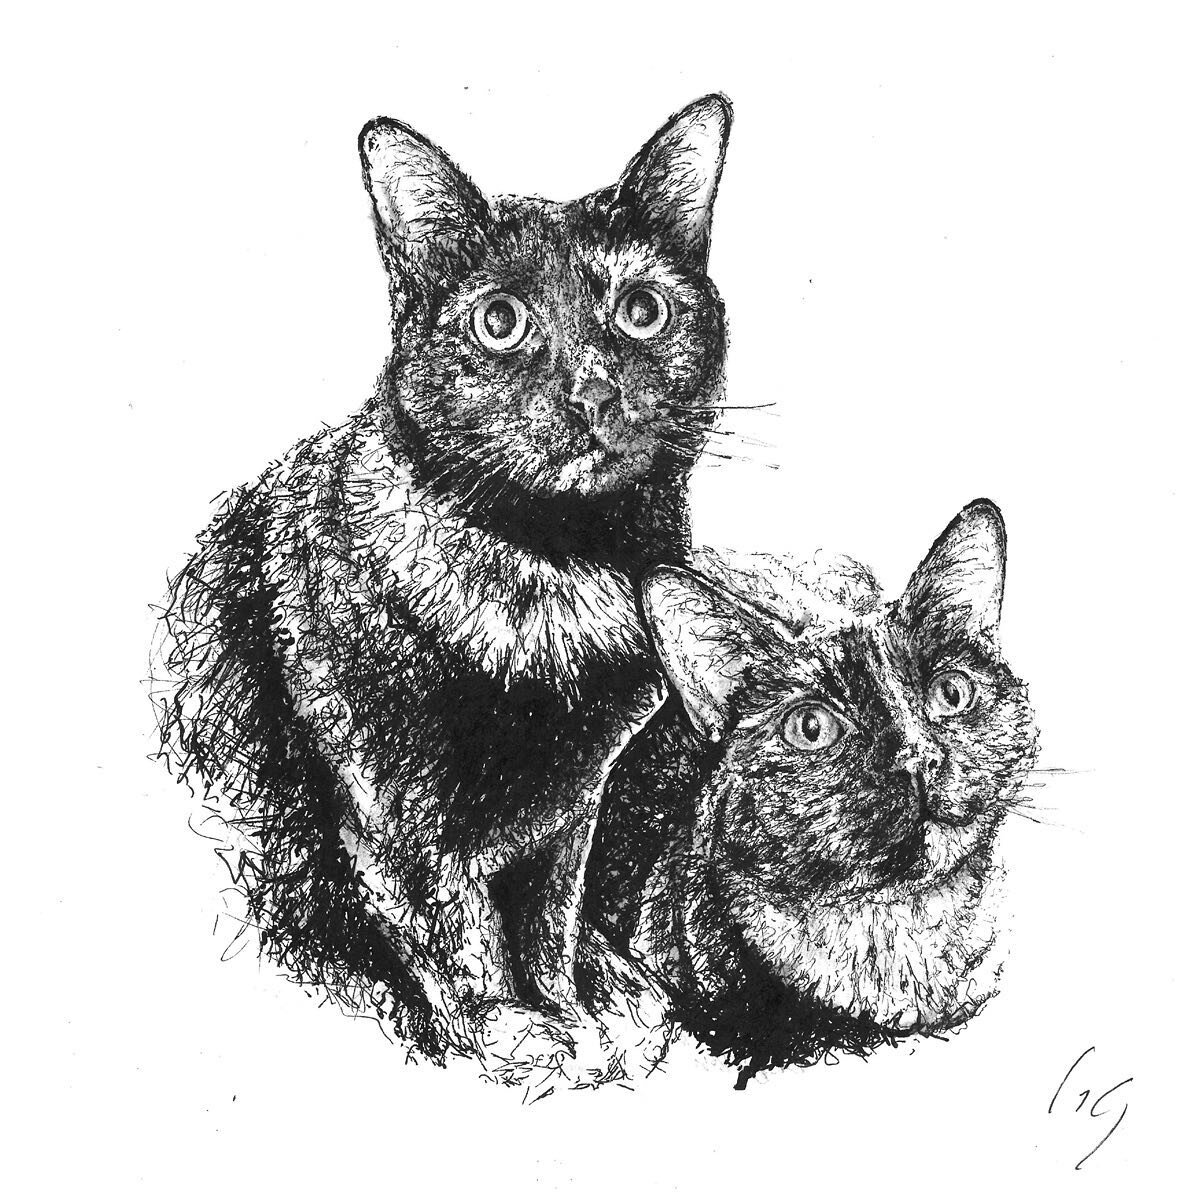 Guess I&rsquo;m a cat person now. 😸
Mia and Maya / 9&rdquo;x12&rdquo; / pen &amp; ink

Especially enjoyed this process&mdash;first of many cat portraits, I hope, thanks to @bmckeeby Enjoy your custom piece! 

#blackandwhite #penandink #catsofinstagr